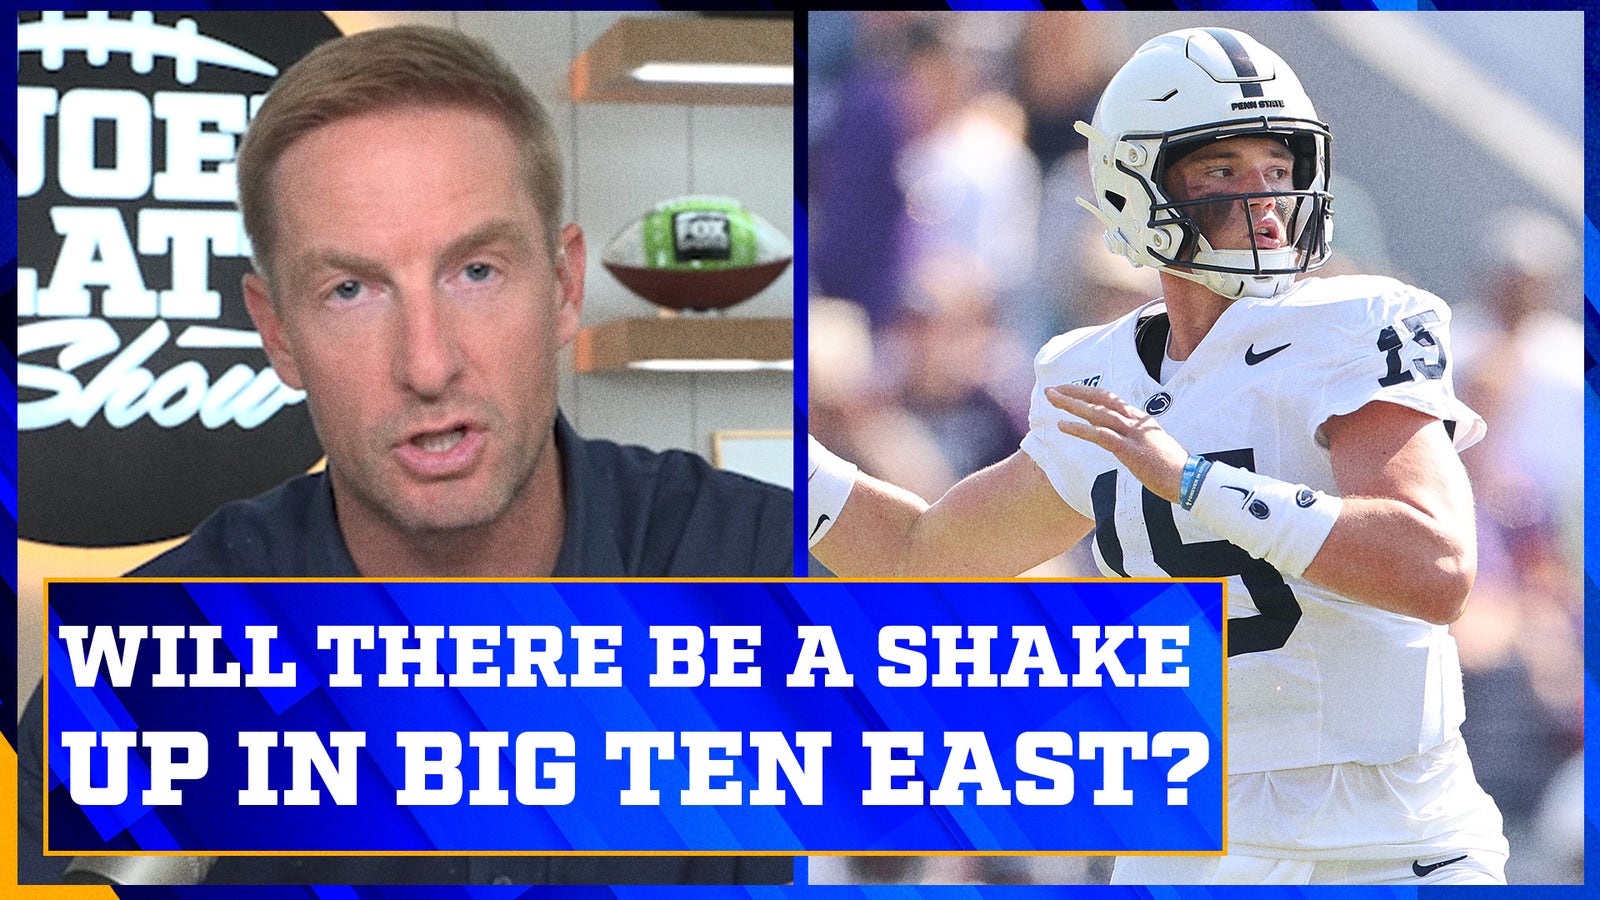 What is the bigger picture for Penn State and Ohio State in the Big Ten?